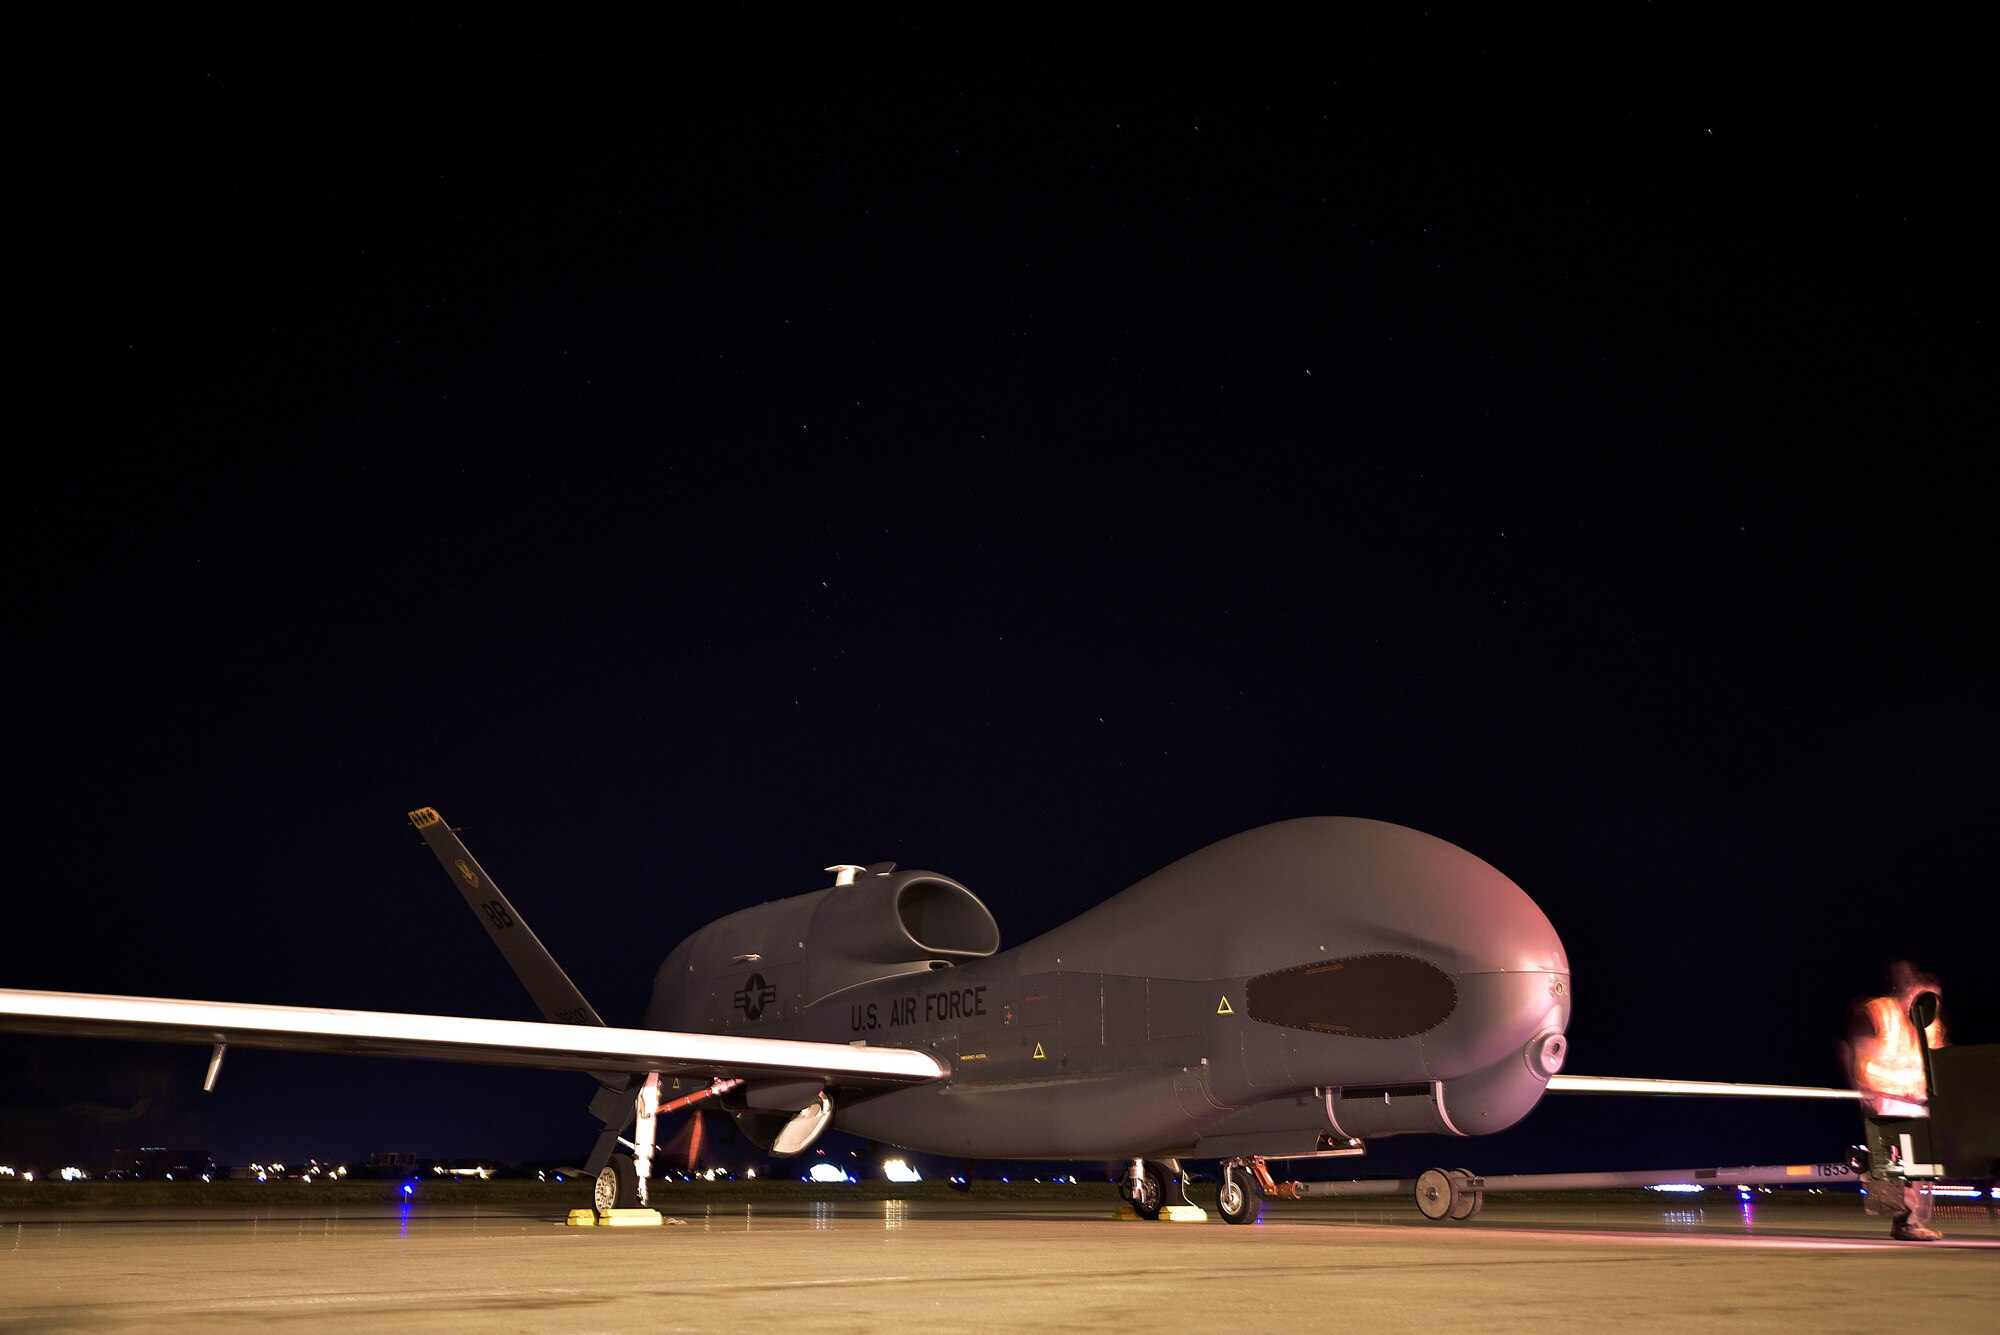 An RQ-4 Global Hawk is towed during flight recovery at Misawa Air Base, Japan, Aug. 19, 2015. Several of these unmanned aircraft will operate out of Misawa until December 2015, and will provide a broad spectrum of intelligence, surveillance and reconnaissance collection capabilities in support of joint combatant forces in worldwide peacetime, contingency and crisis operations. (U.S. Air Force photo by Senior Airman Jose L. Hernandez-Domitilo/Released)